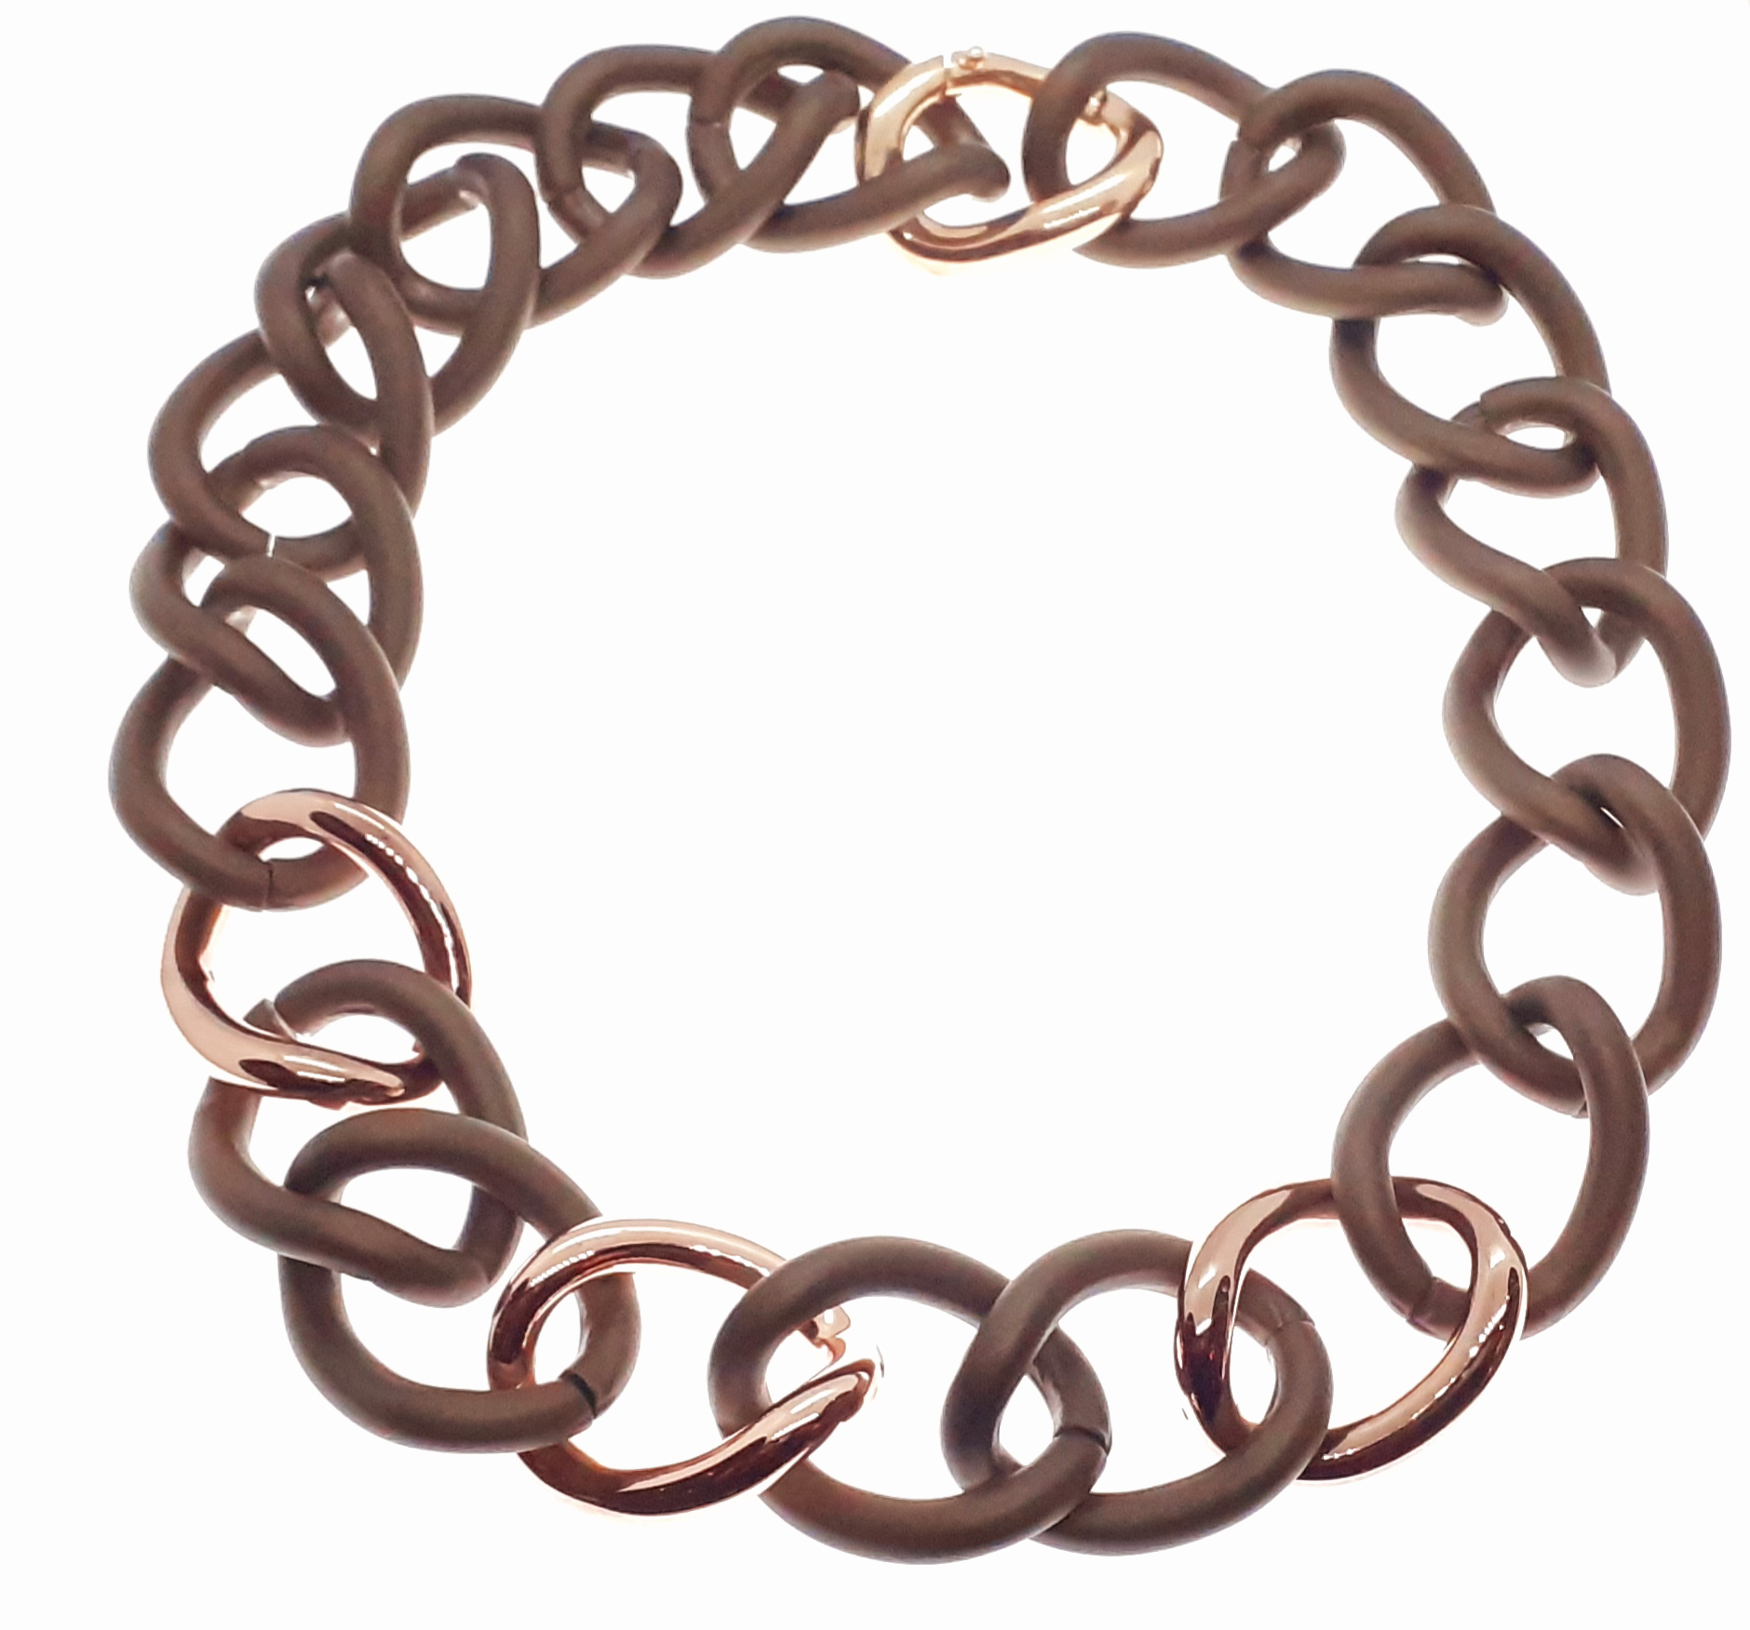 Sensi joyas jewellery Granada silver engagementSILVER NECKLACE WITH ROSE GOLD COATING AND RUBBER 